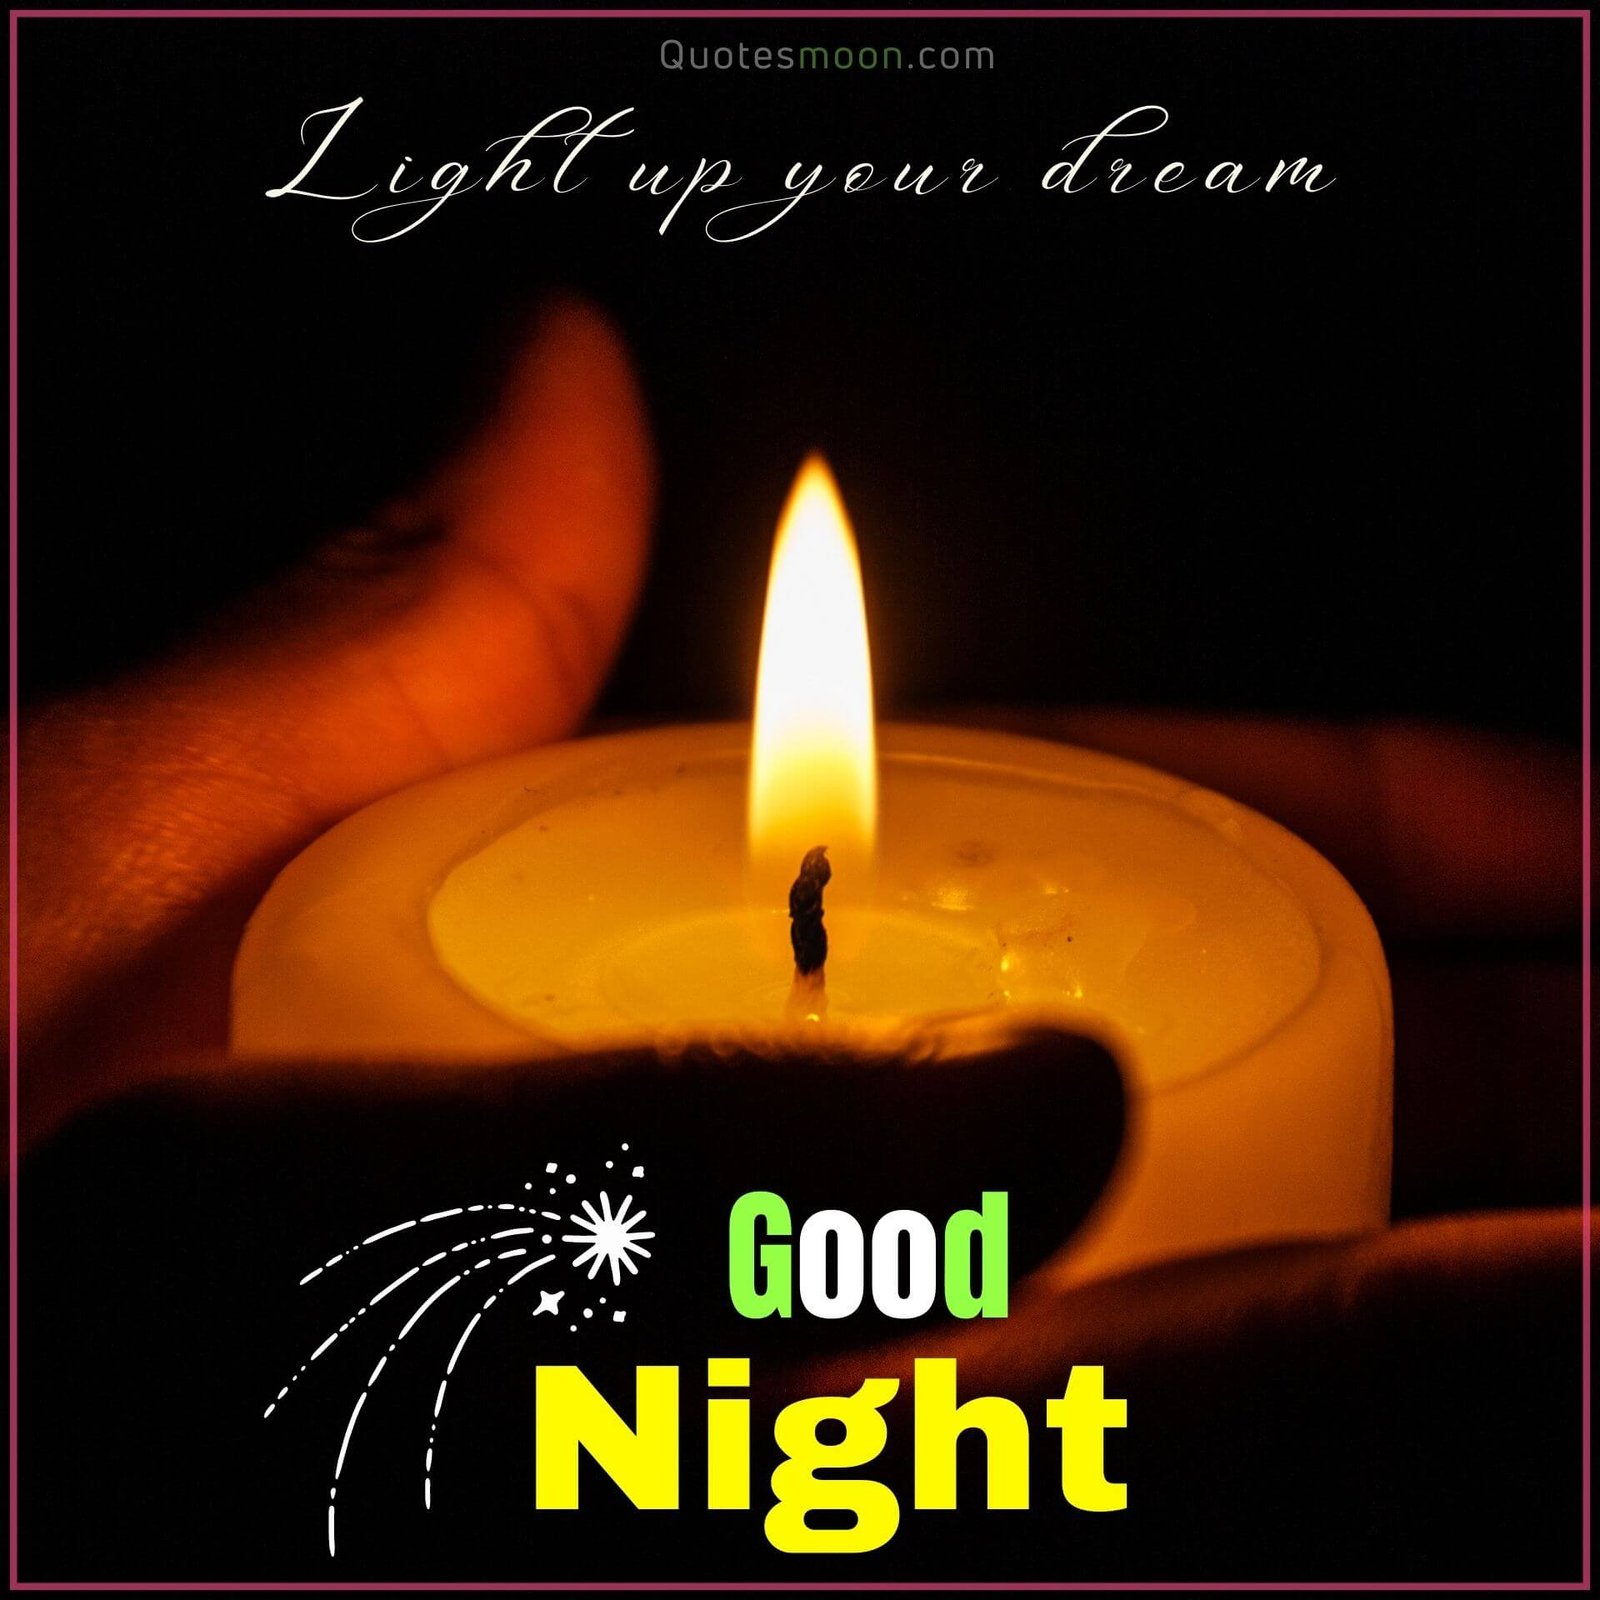 light up your dream greetings image with hd